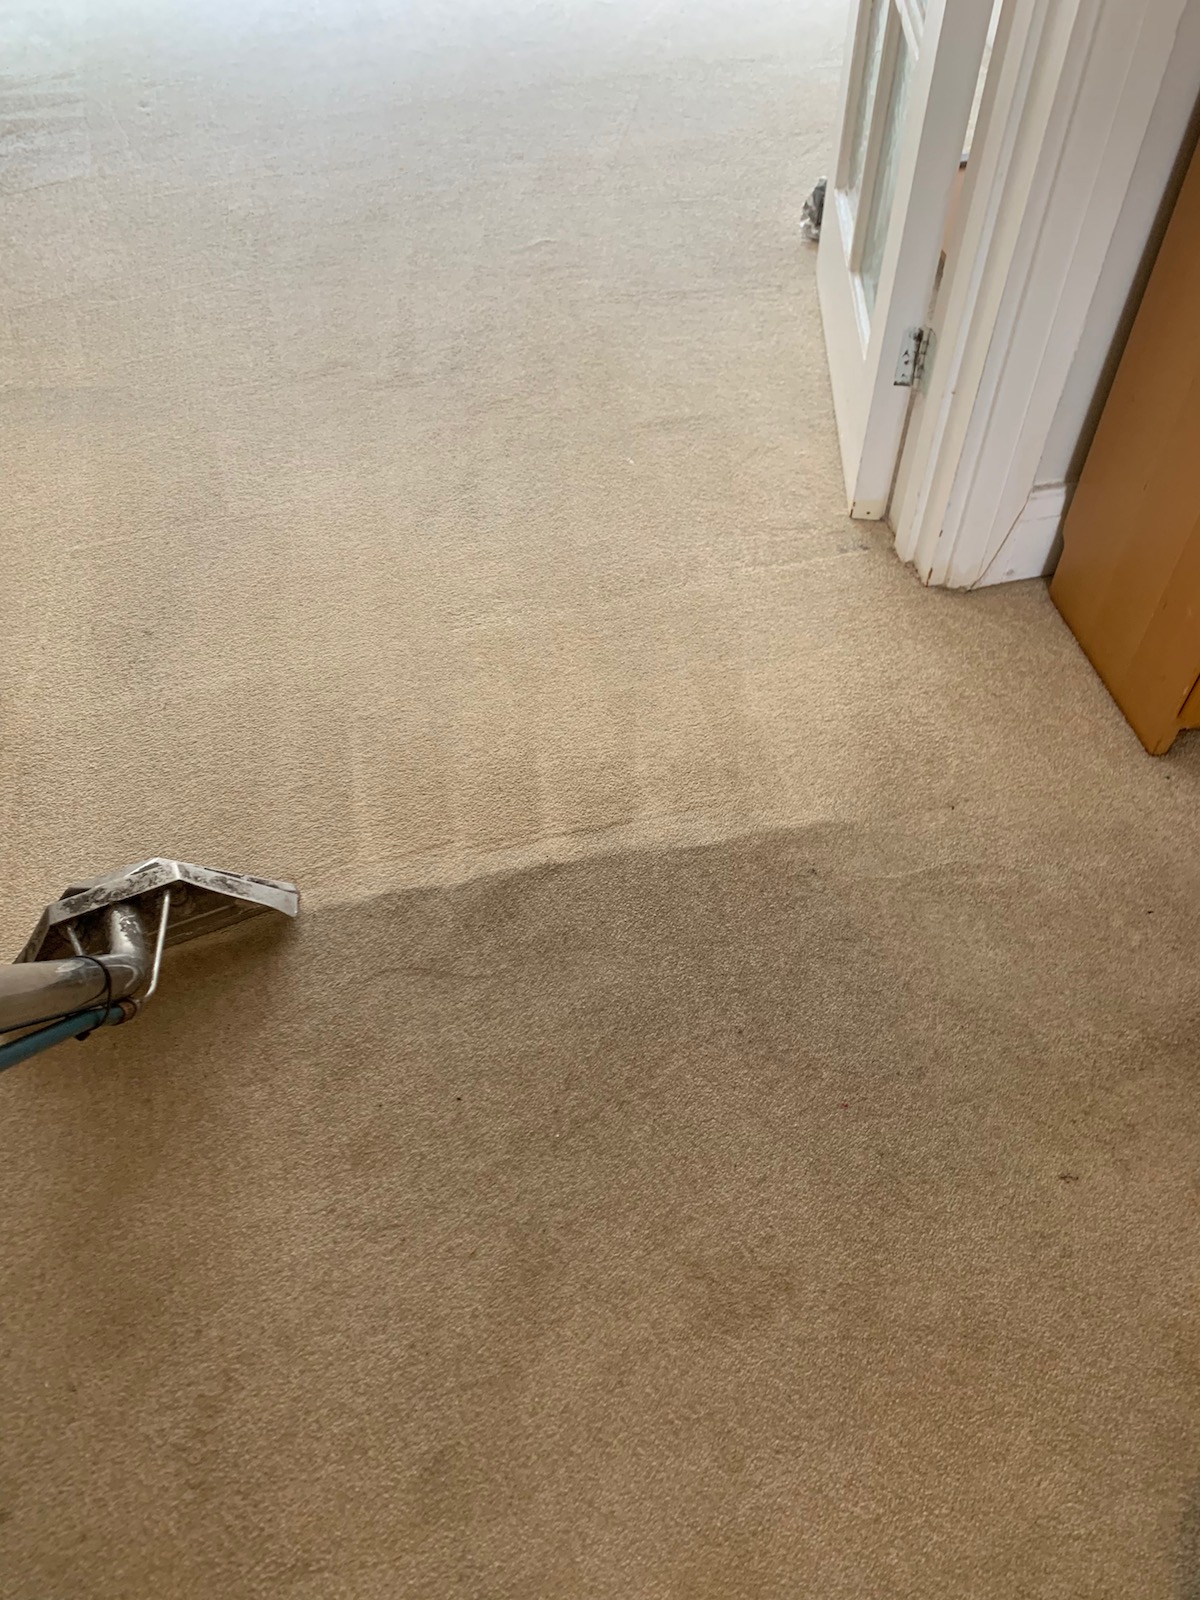 carpet-cleaning-in-pimlico